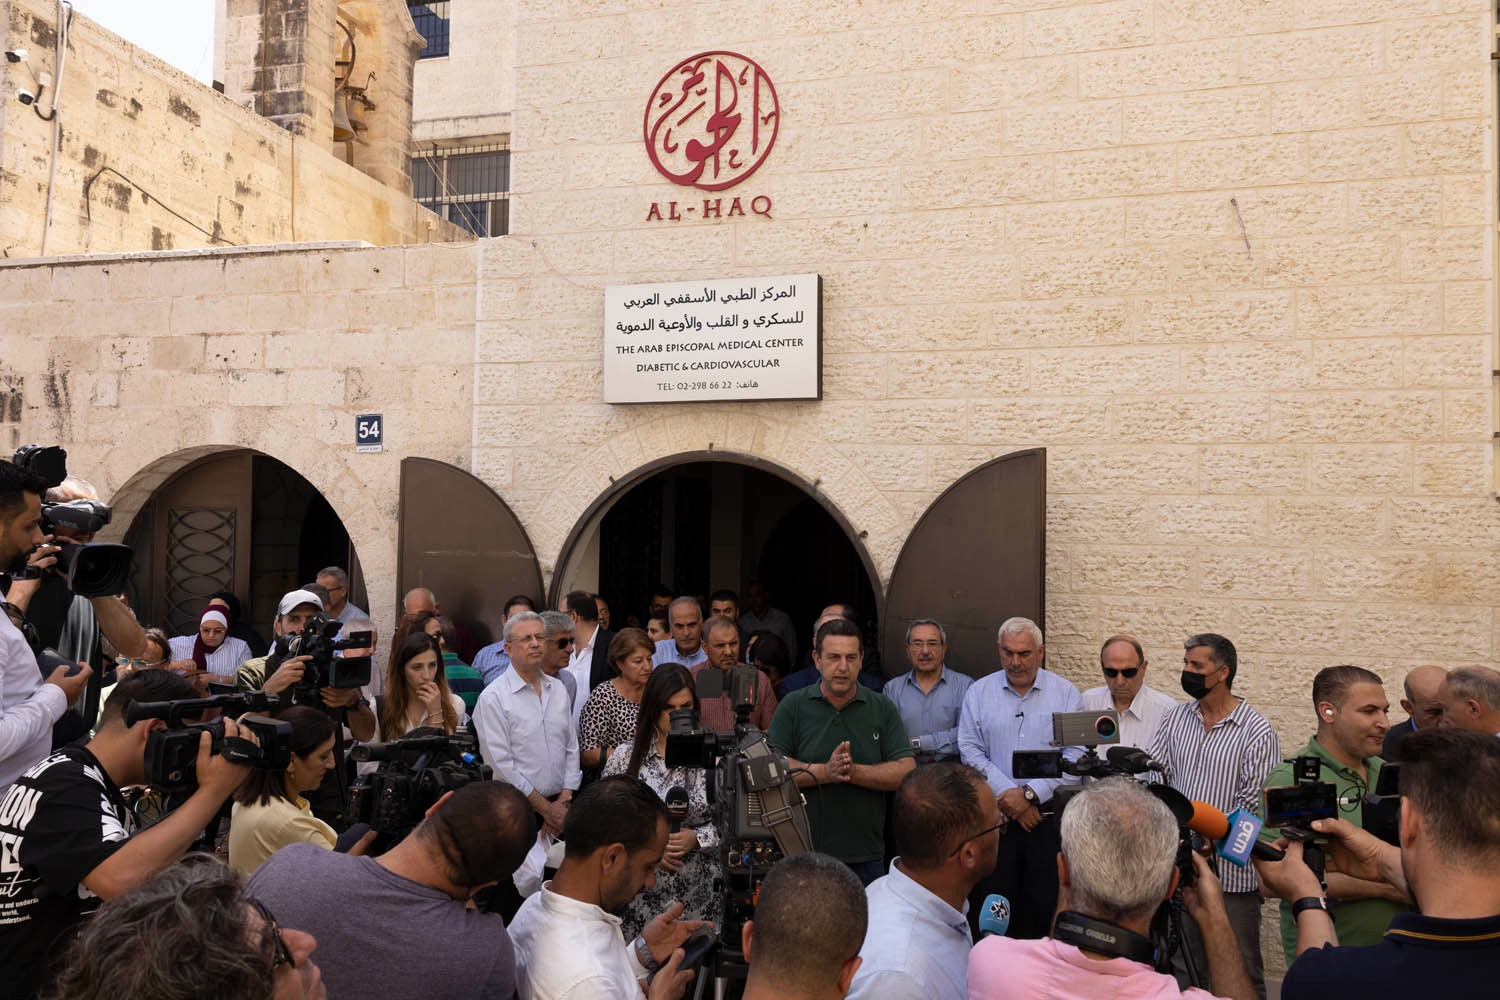 Heads of Palestinian NGOs speak to the media outside of Al-Haq's offices after the Israeli army raided their offices, Ramallah, West Bank, August 18, 2022. (Oren Ziv)